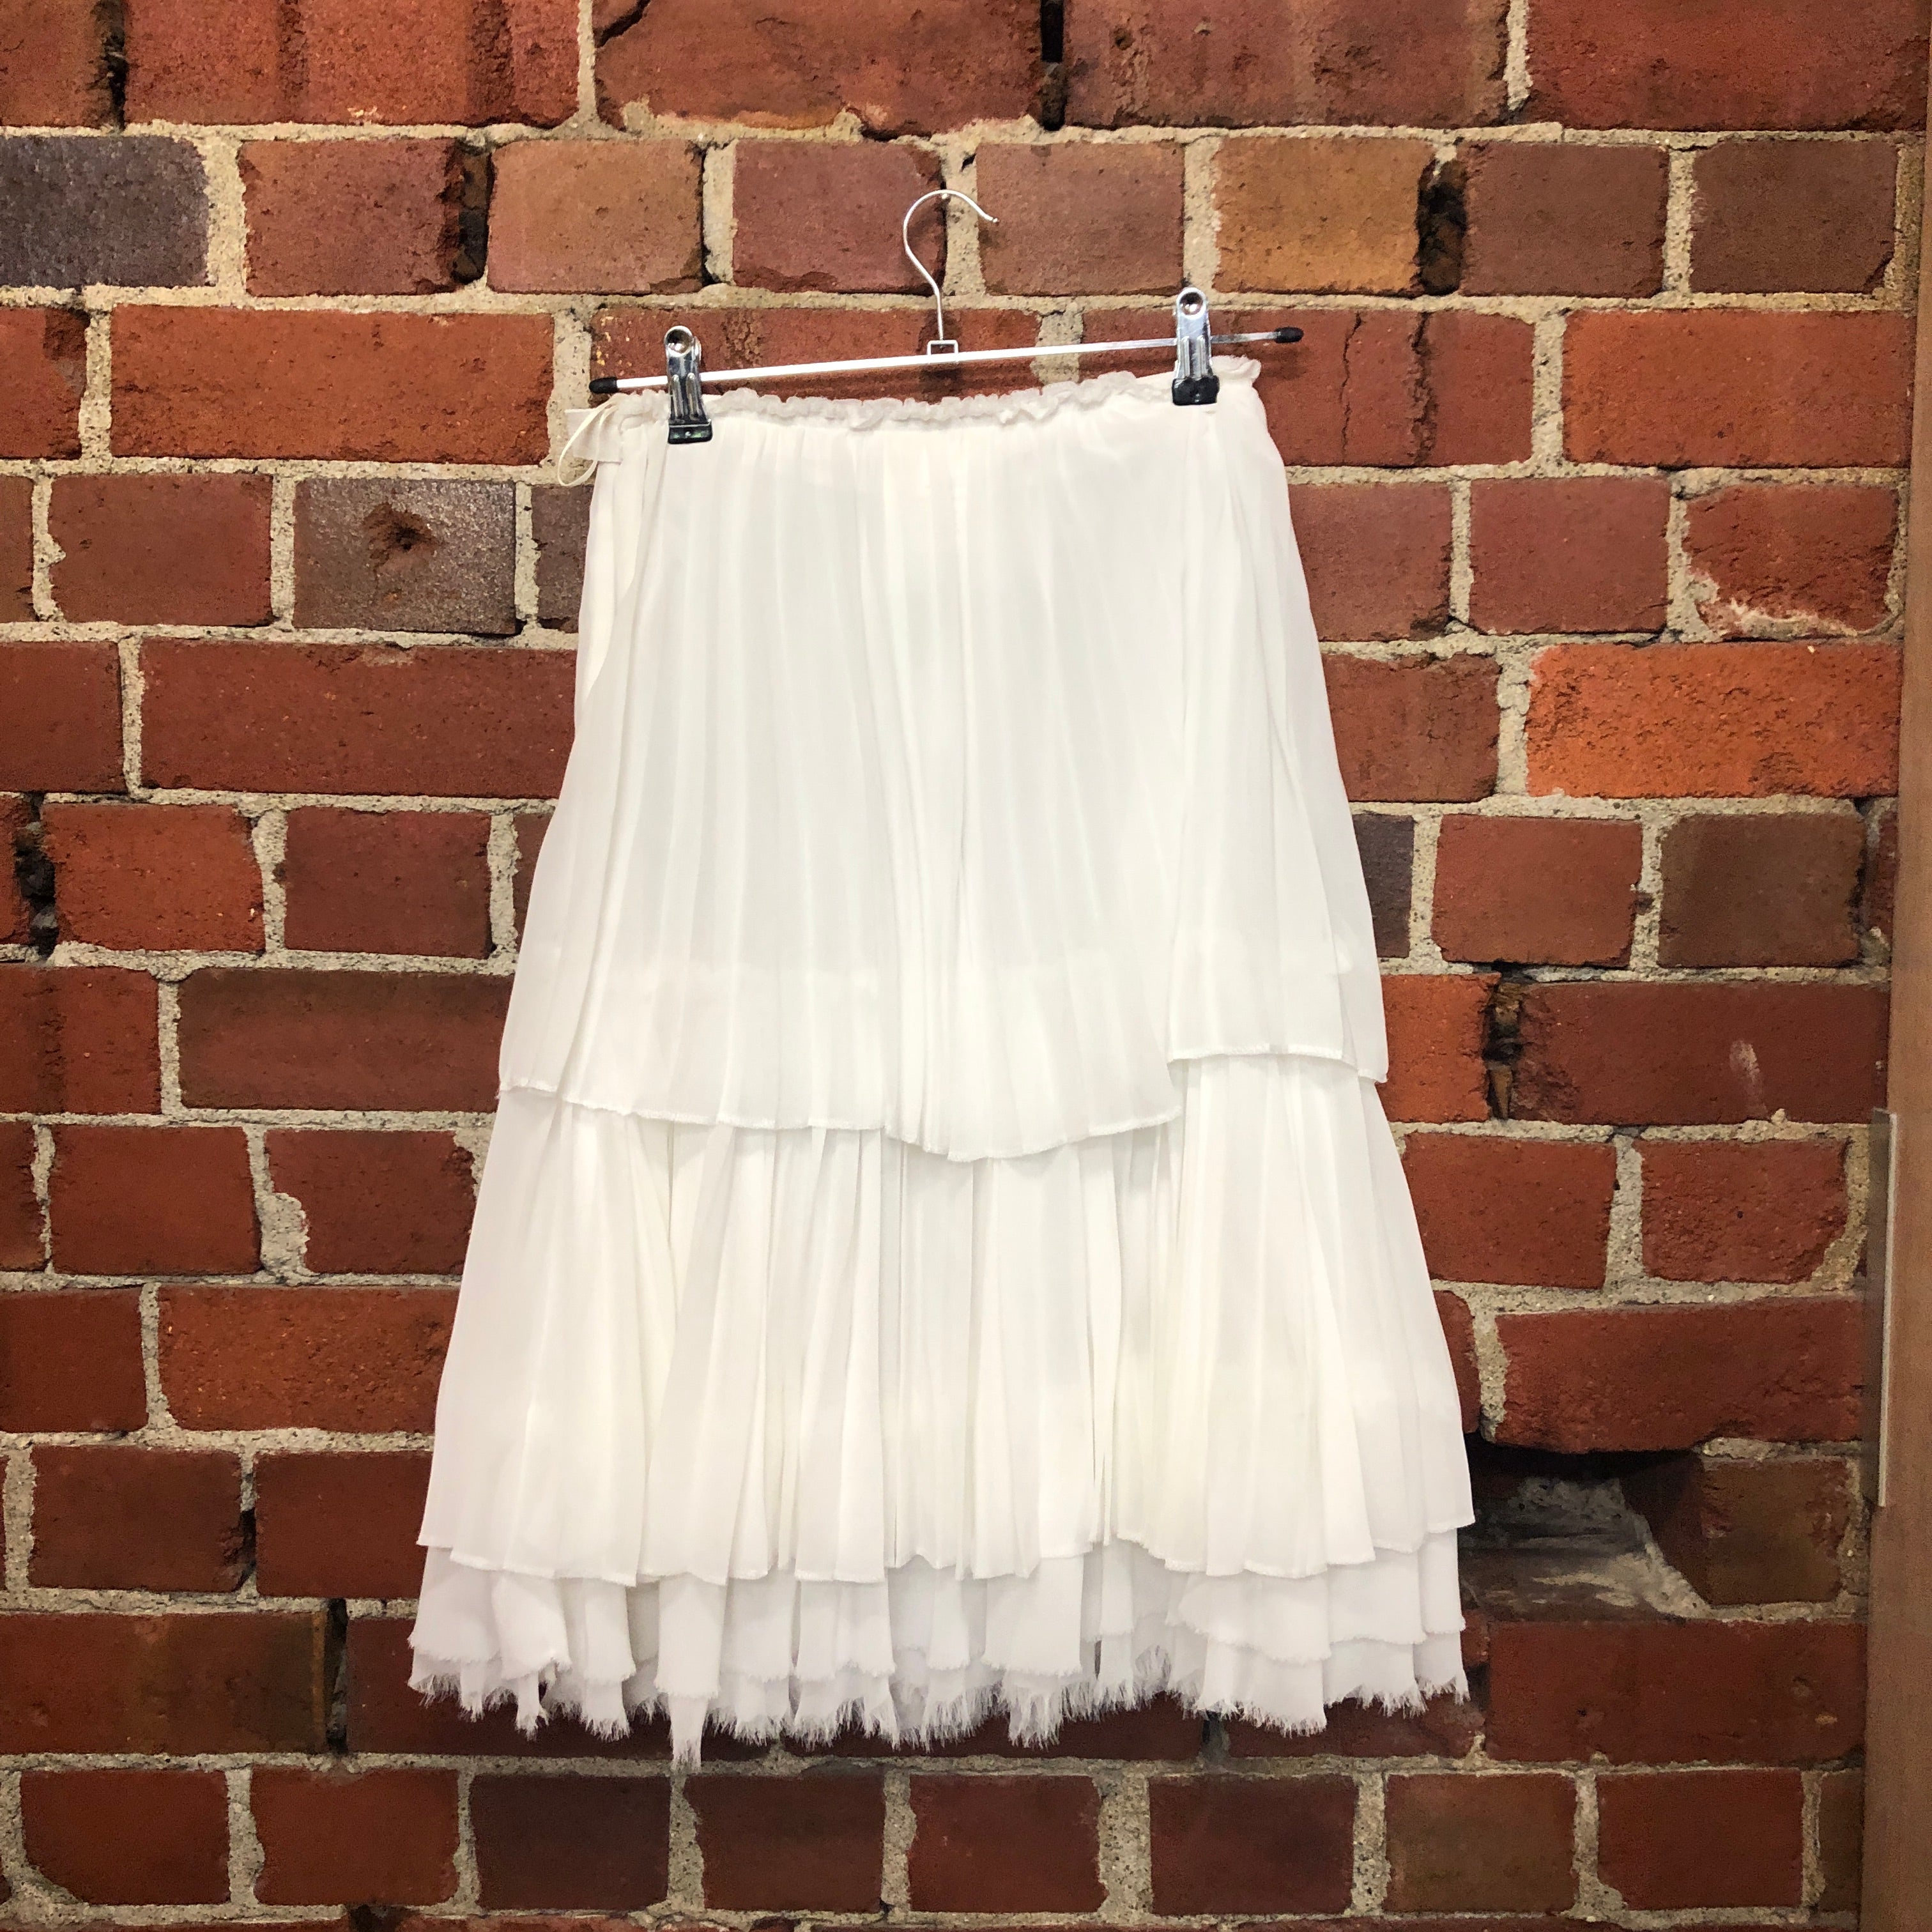 COMME DES GARCONS frilly layered skirt